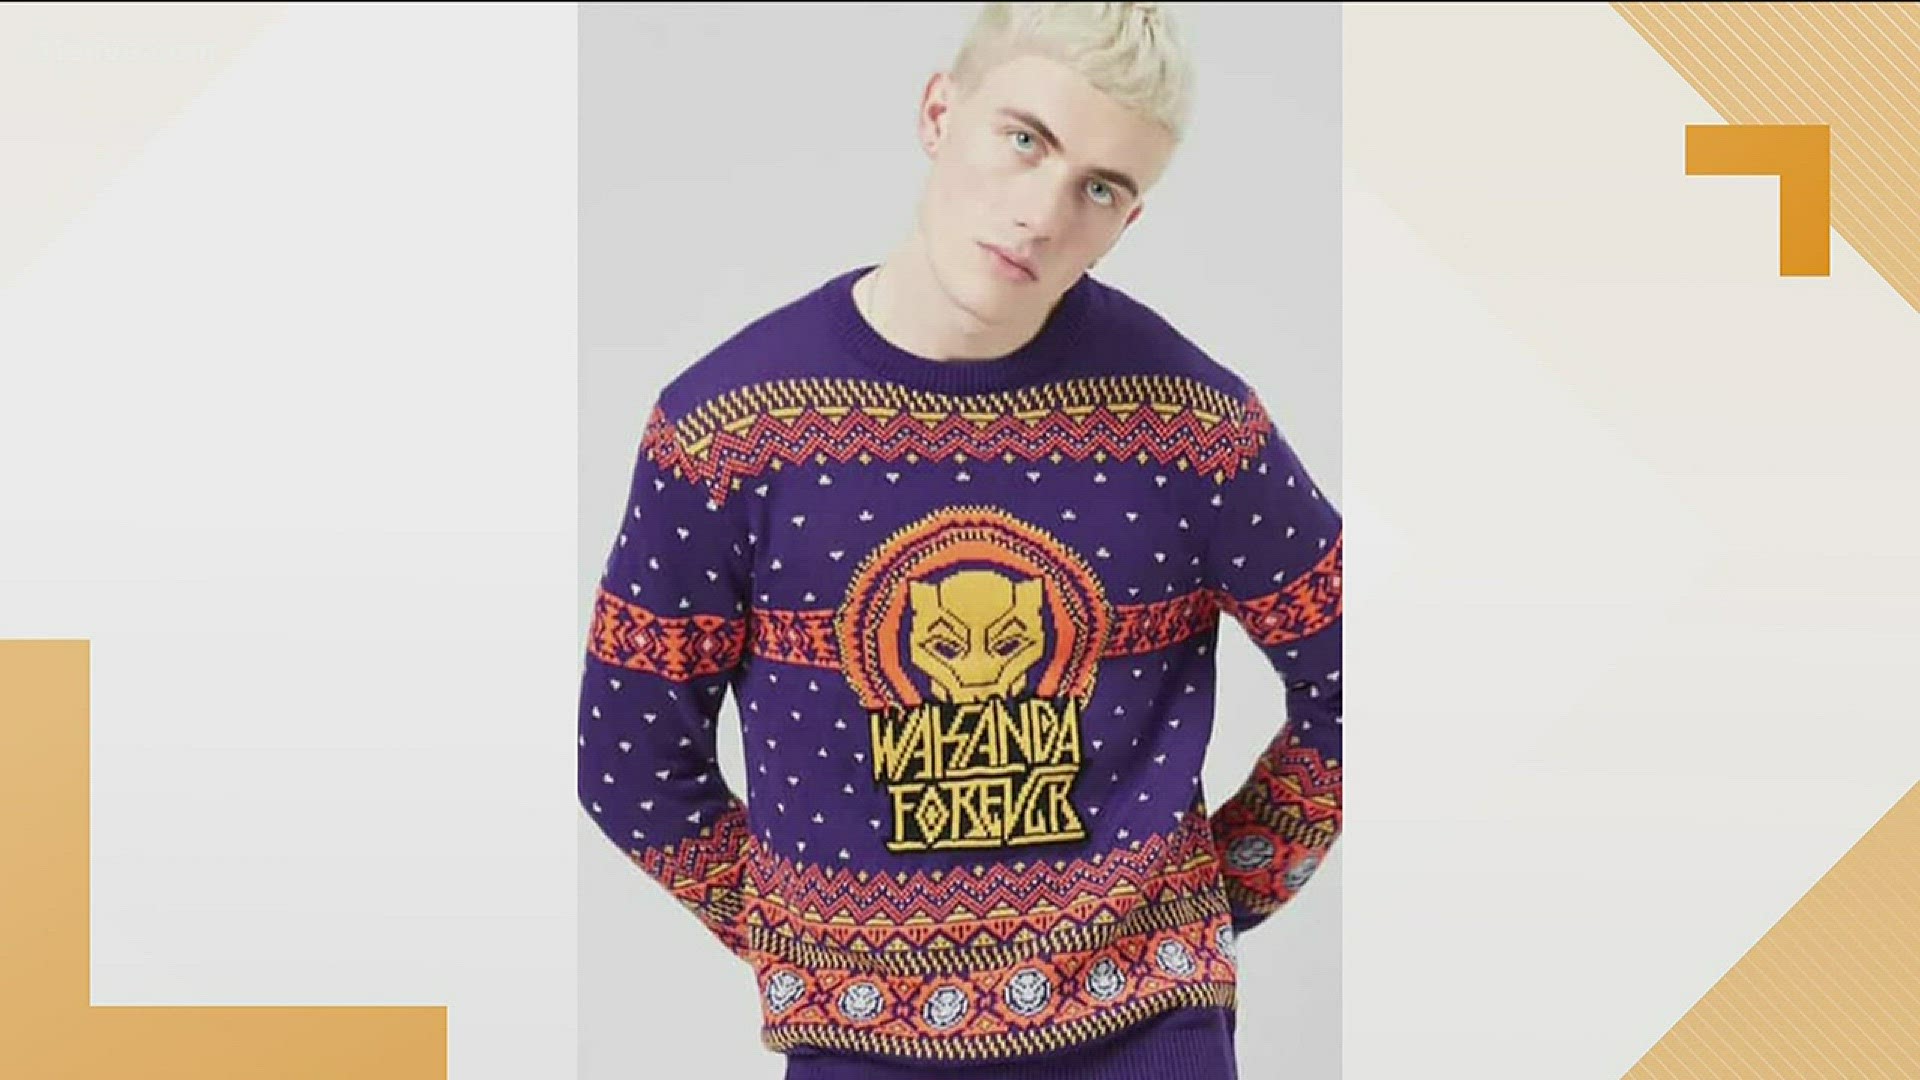 Critics say a person of color should have modeled the sweater. What do you think?